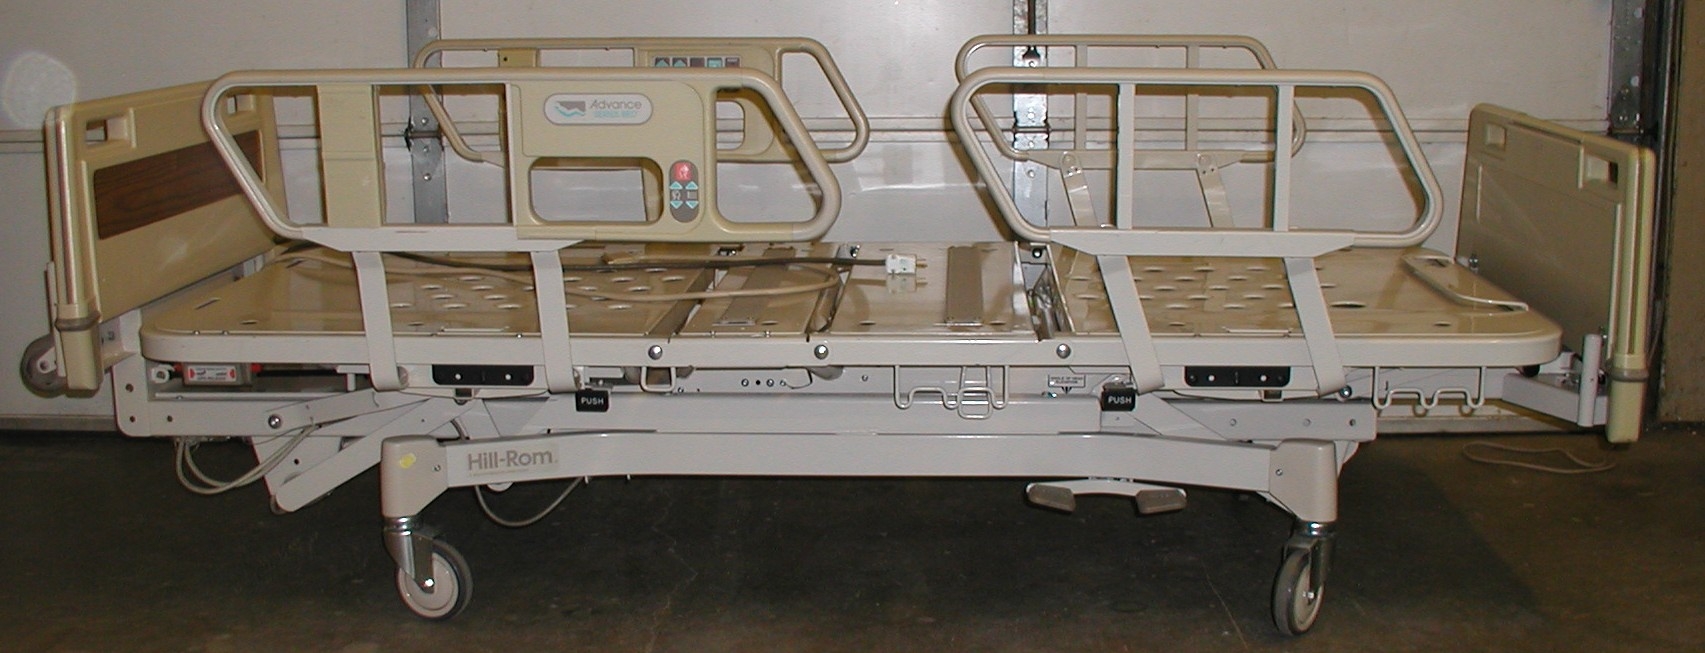 Hill-Rom 1140 Advance 2000 Series Electric Bed